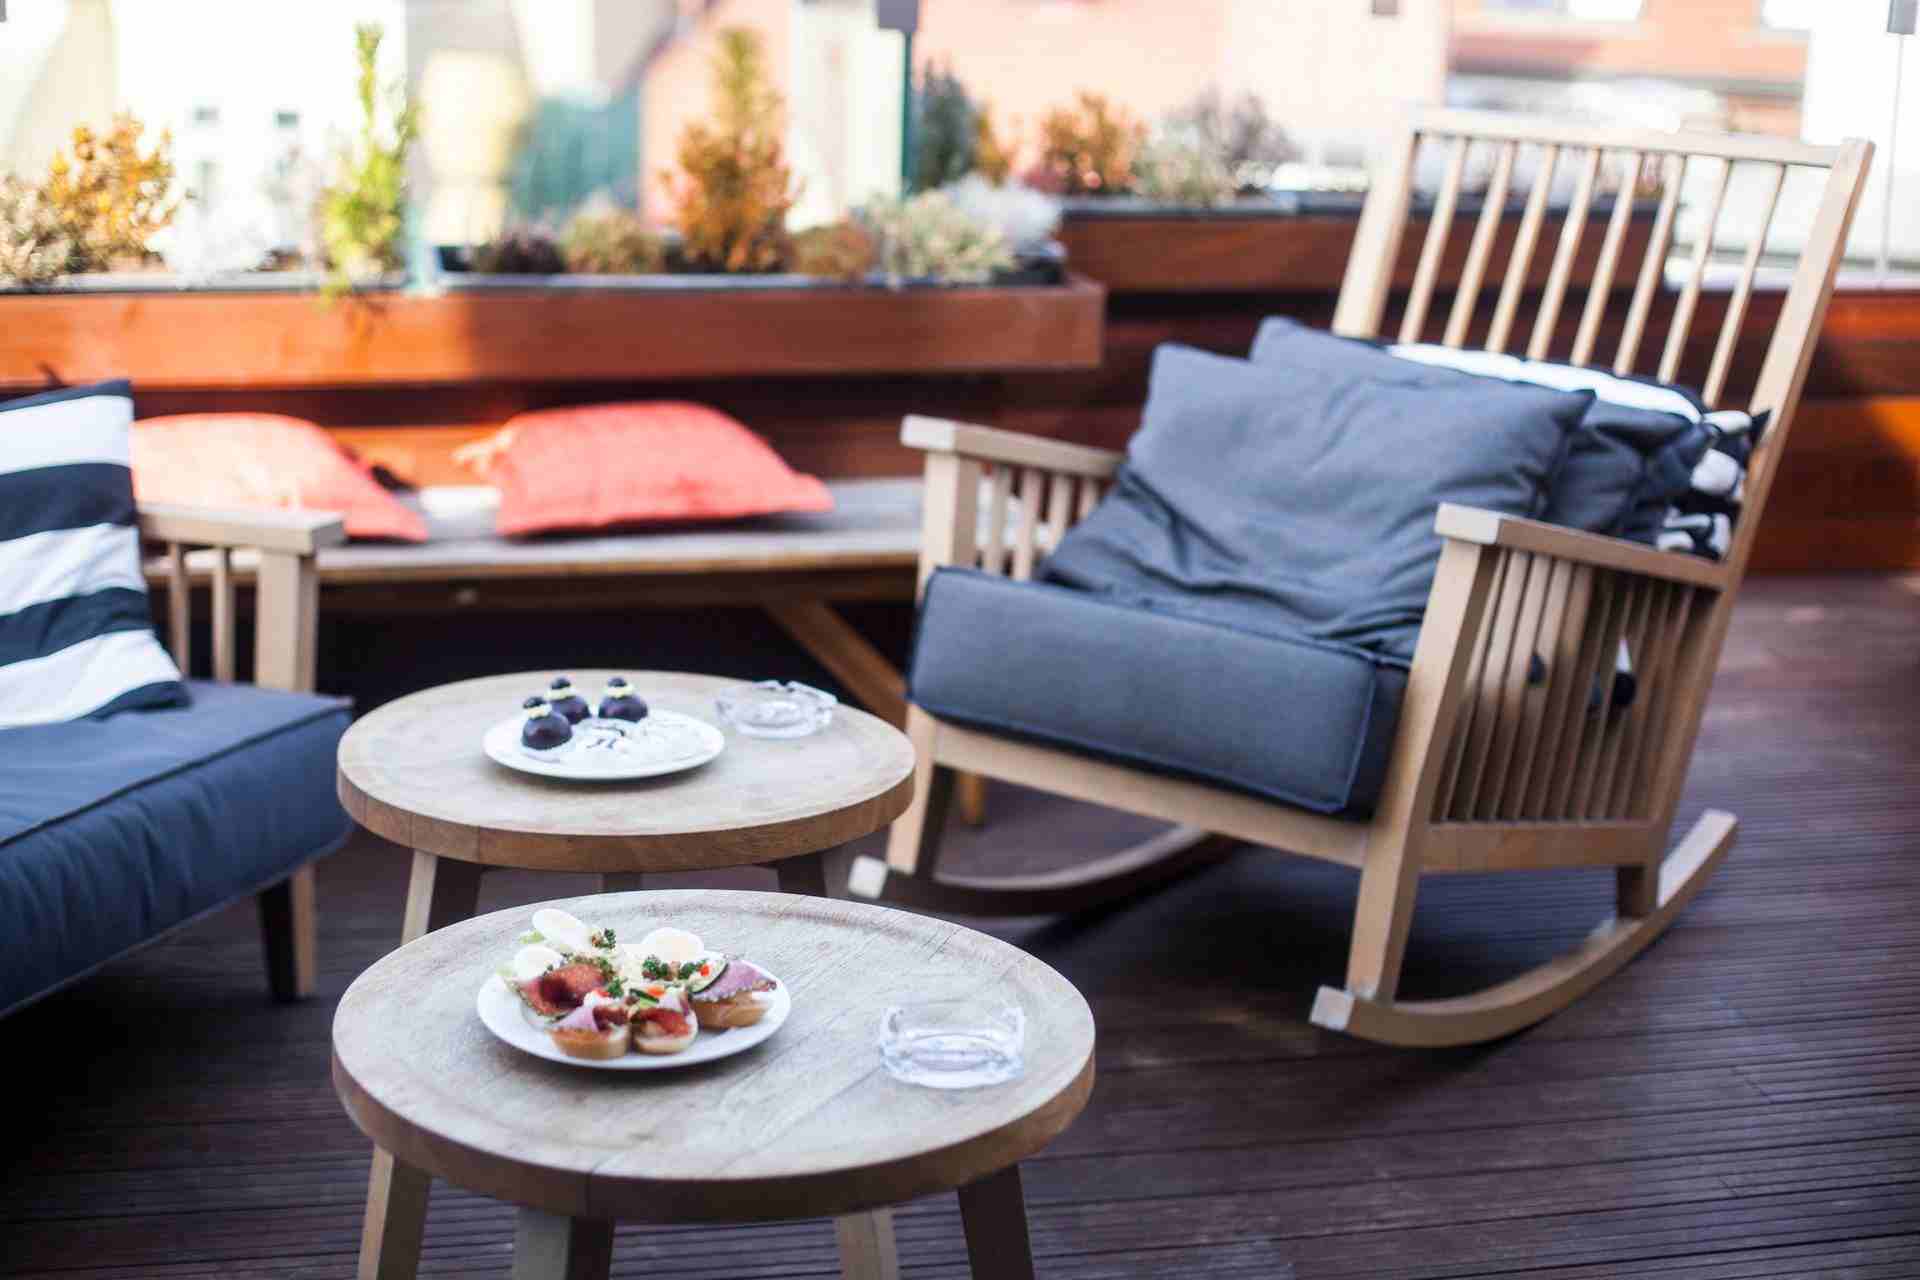 Things to Consider Before Buying an Outdoor Chair – Buyer's Guide